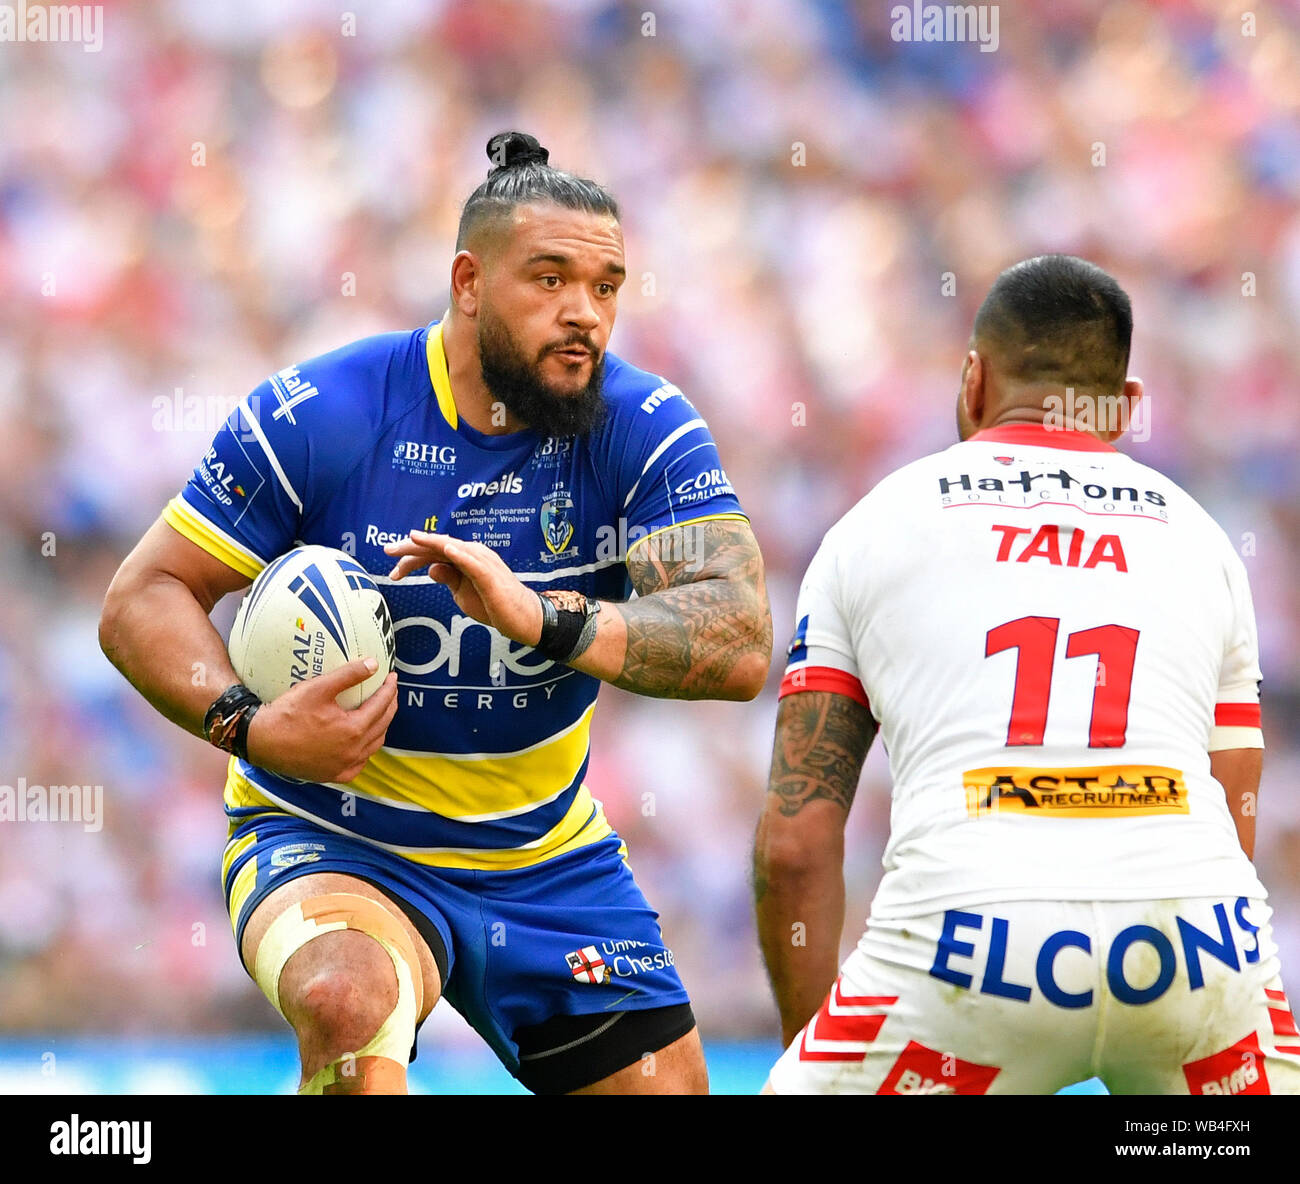 London, UK. 24th August, 2019. Wembley Stadium, London, England; Rugby Football League Coral Challenge Cup final, Warrington Wolves versus St Helens; Ben Murdoch-Masila of Warrington Wolves looks to run past Zeb Taia of St Helens - Editorial Use Only. Credit: Action Plus Sports Images/Alamy Live News Credit: Action Plus Sports Images/Alamy Live News Credit: Action Plus Sports Images/Alamy Live News Credit: Action Plus Sports Images/Alamy Live News Stock Photo